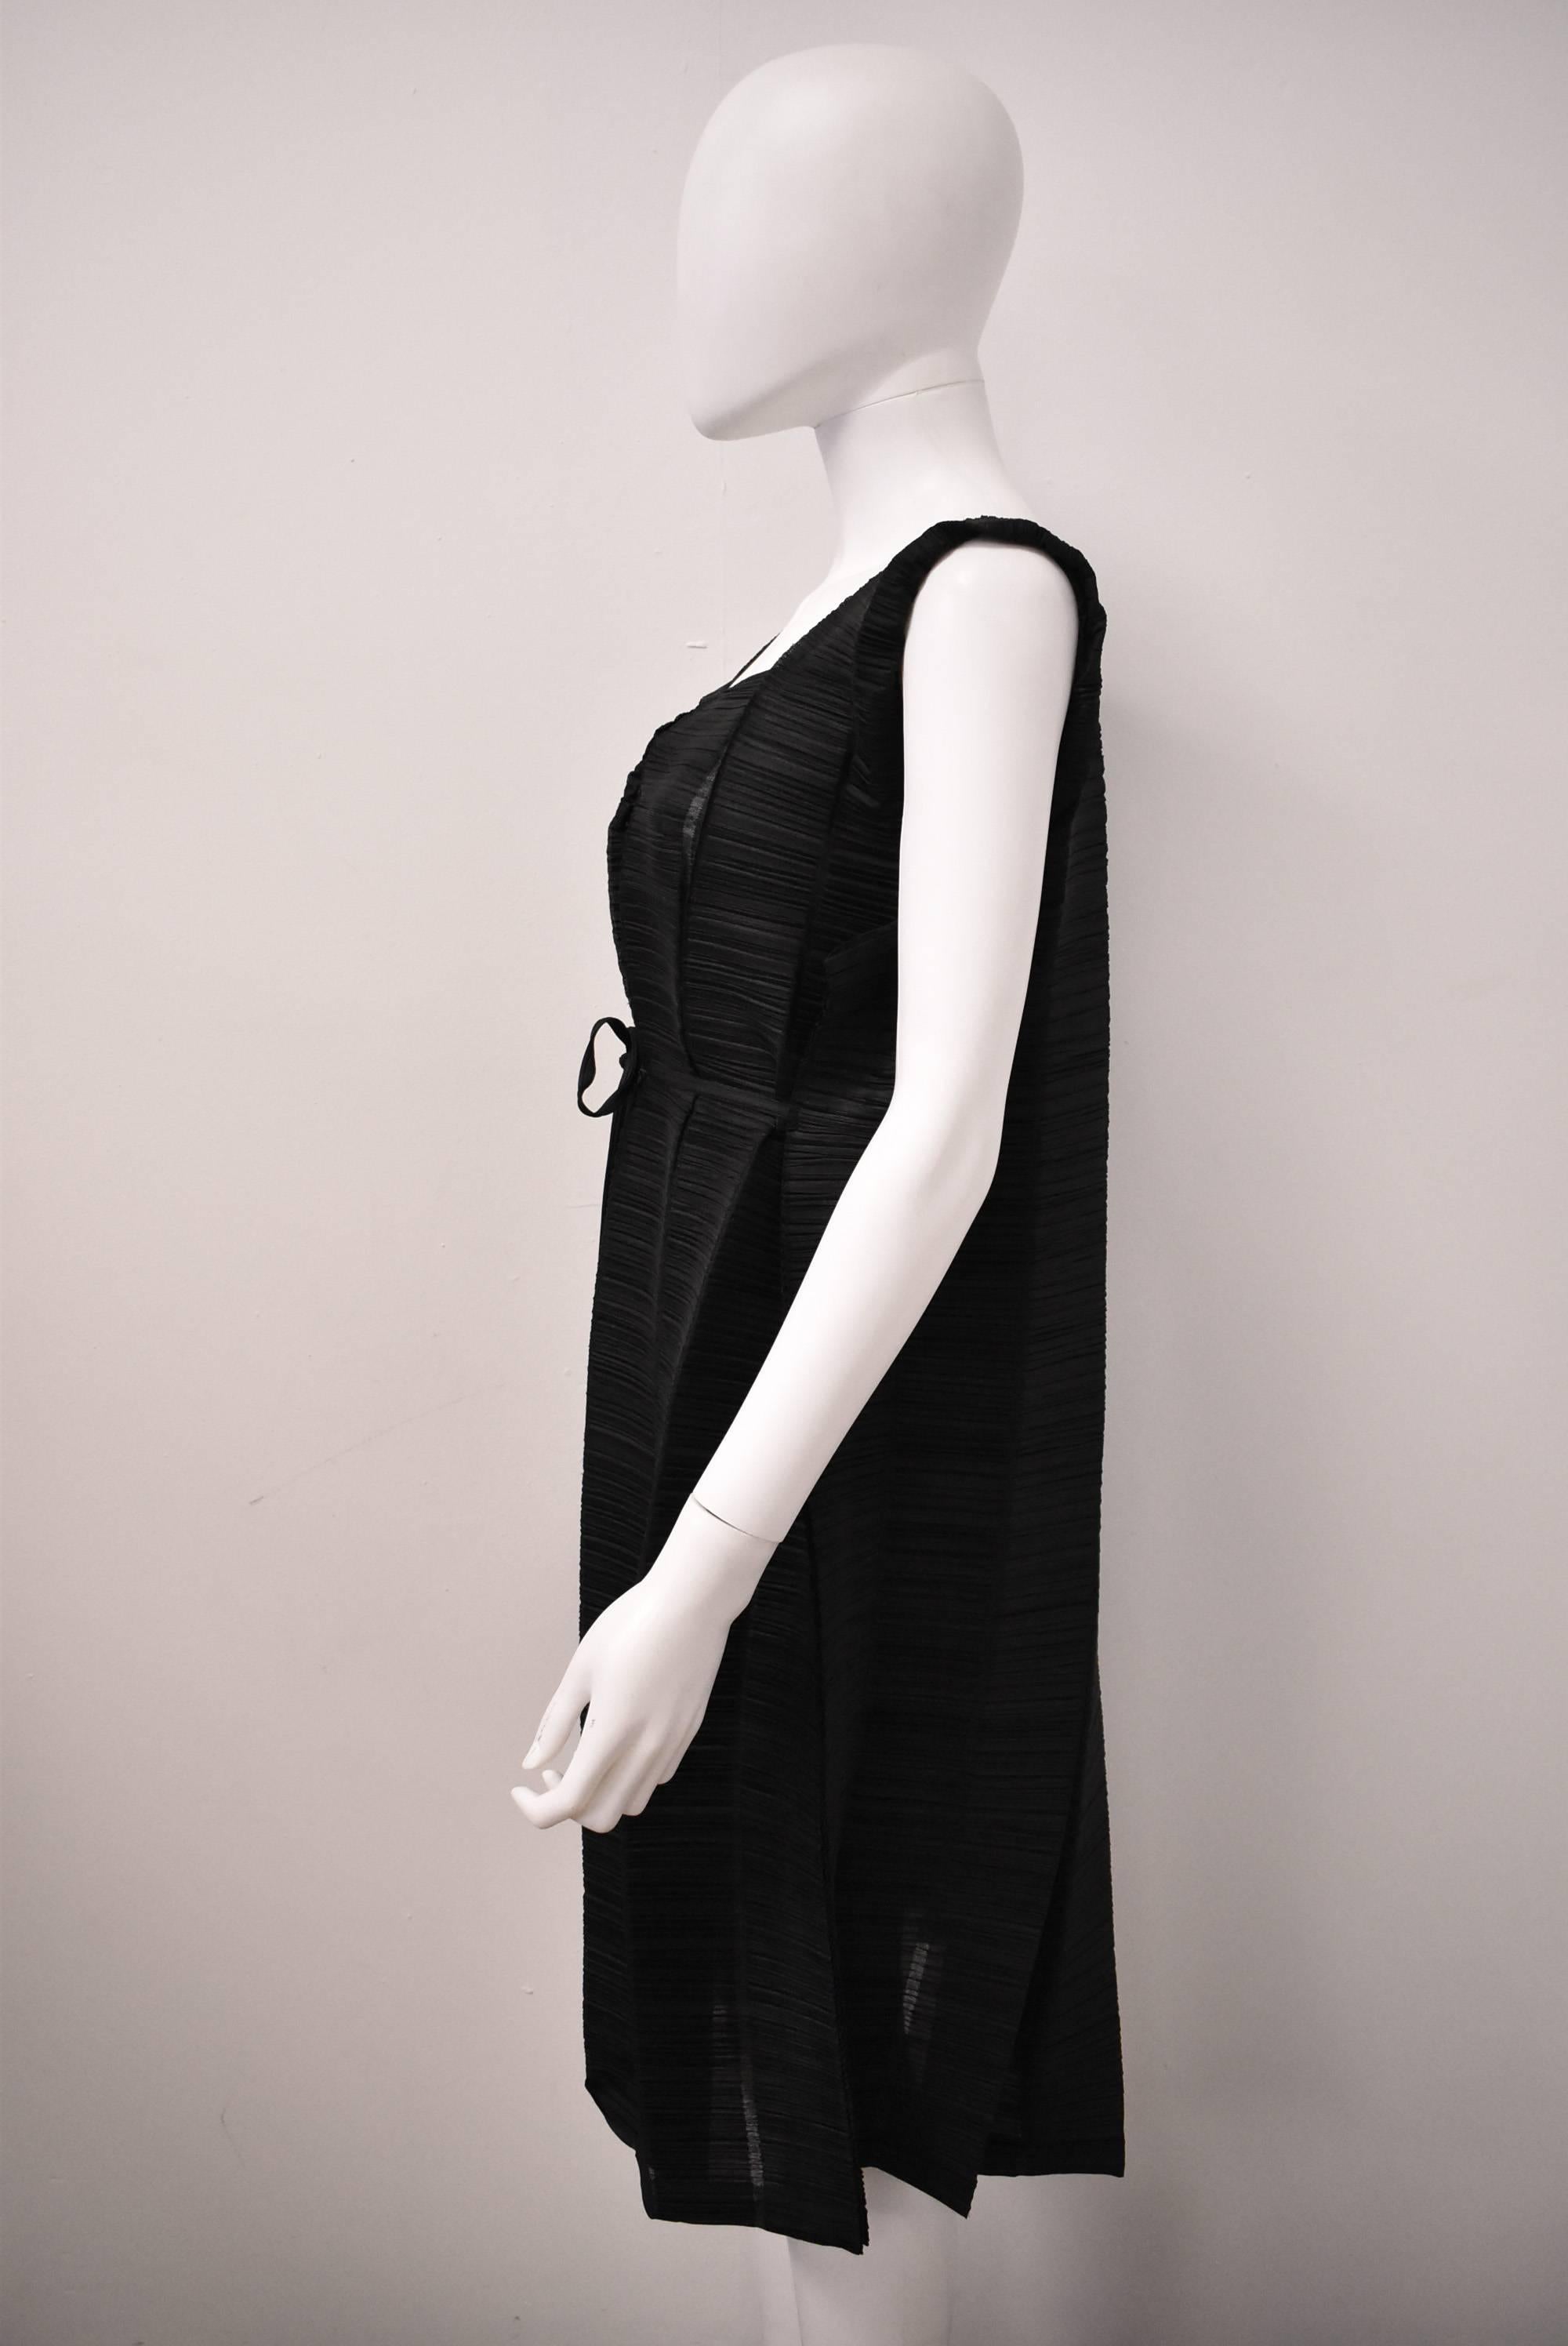 A black pleated dress/cardigan from the Issey Miyake Pleats Please Line. The piece can be worn in two ways, as a sleeveless shift dress or draped cardigan with tie fastening at the front. The piece is constructed from numerous vertical panels that